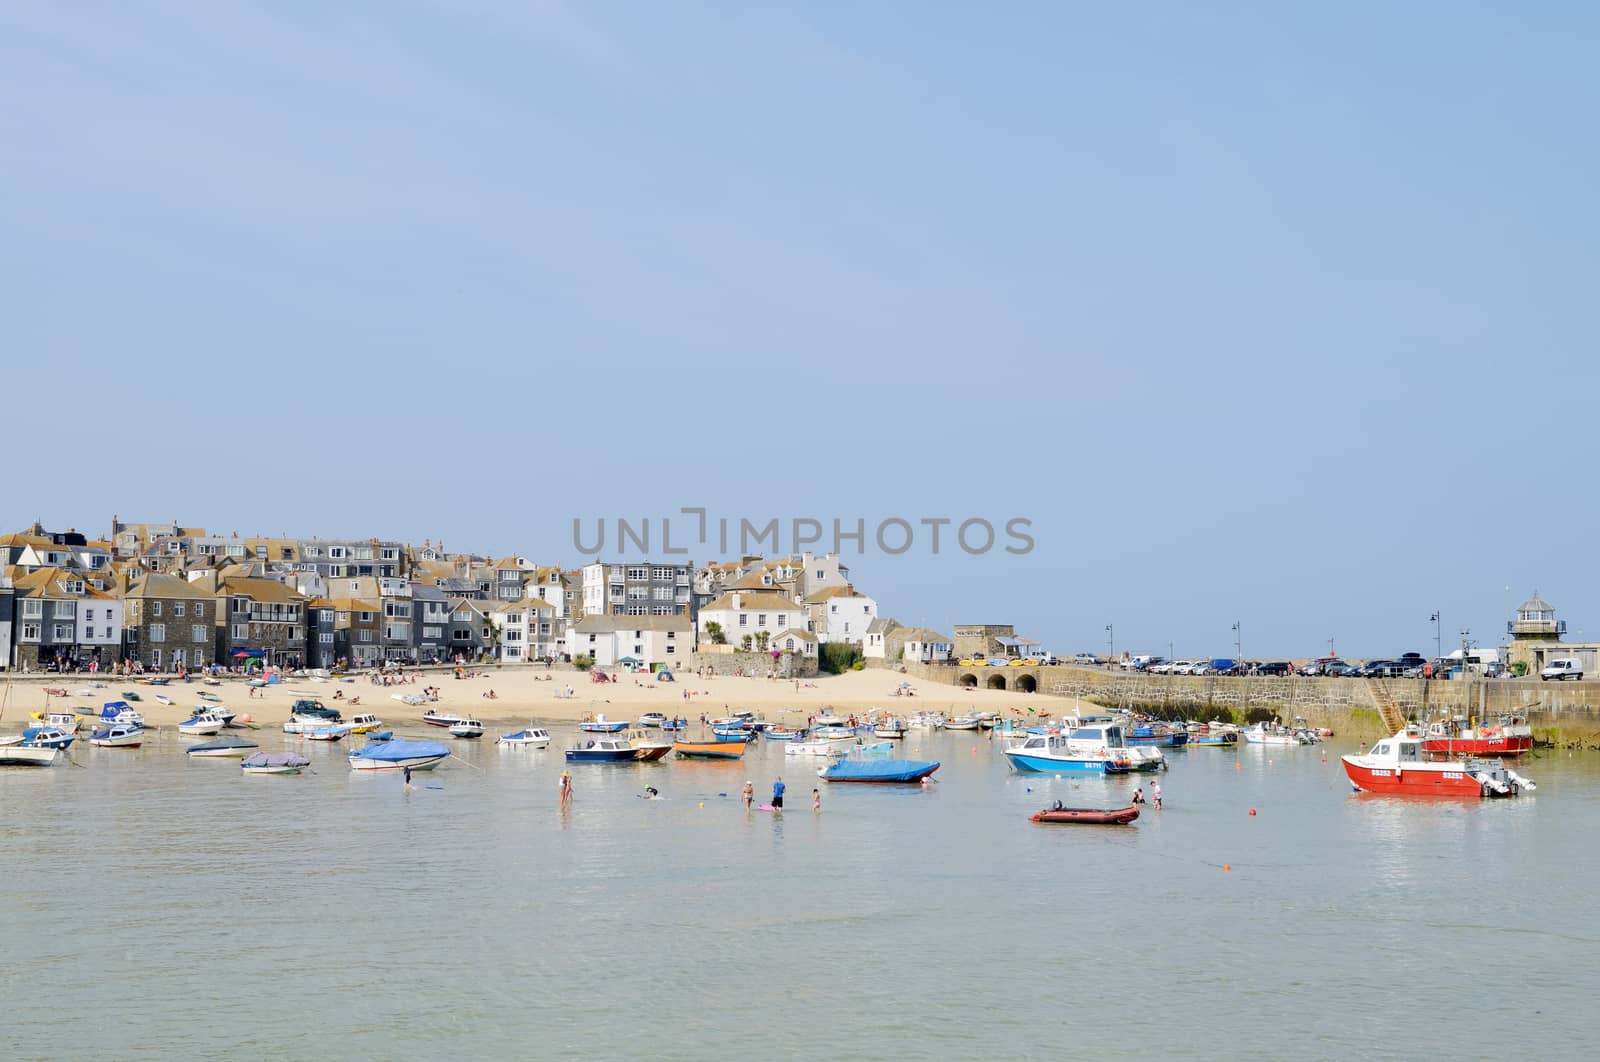 St Ives in Cornwall, England. By the beach boats in harbour on a sunny day.